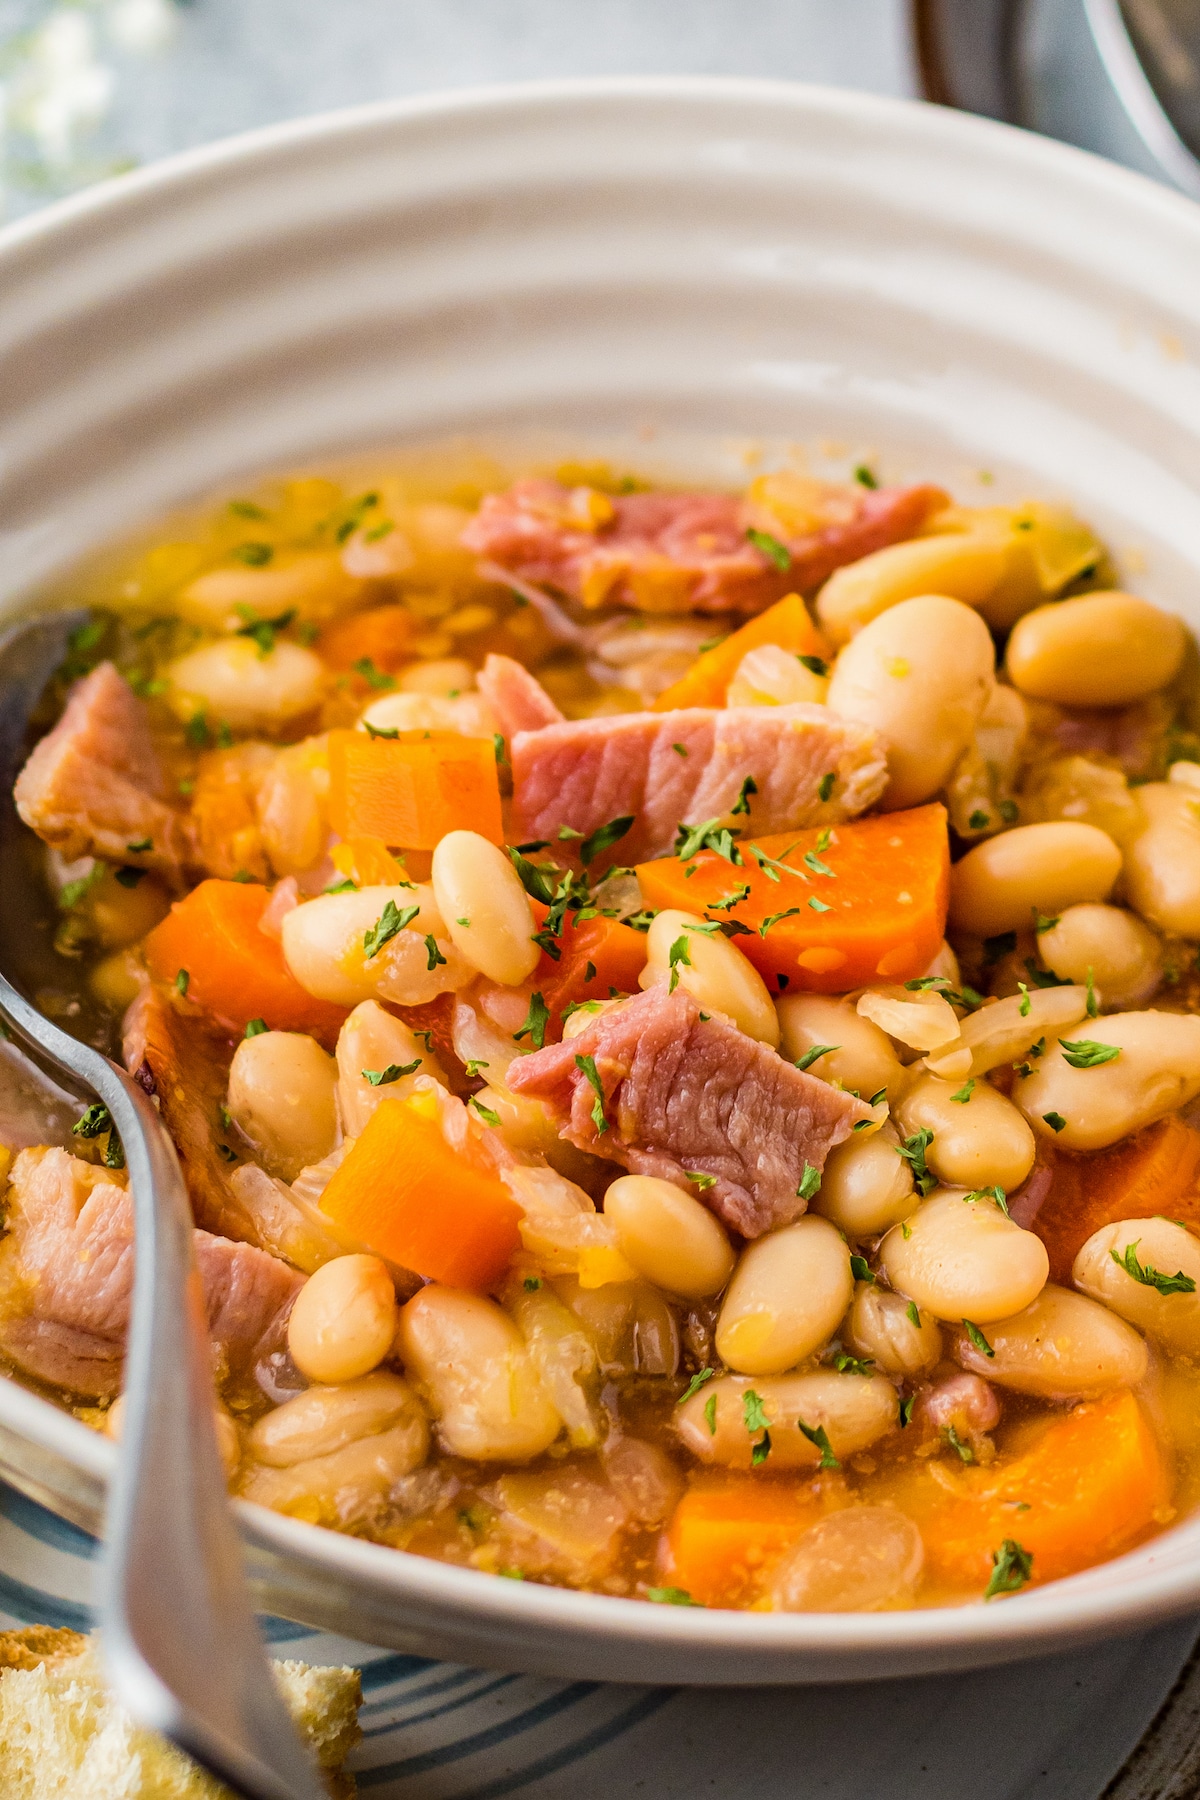 Up close image of ham and beans in a white bowl with a spoon.